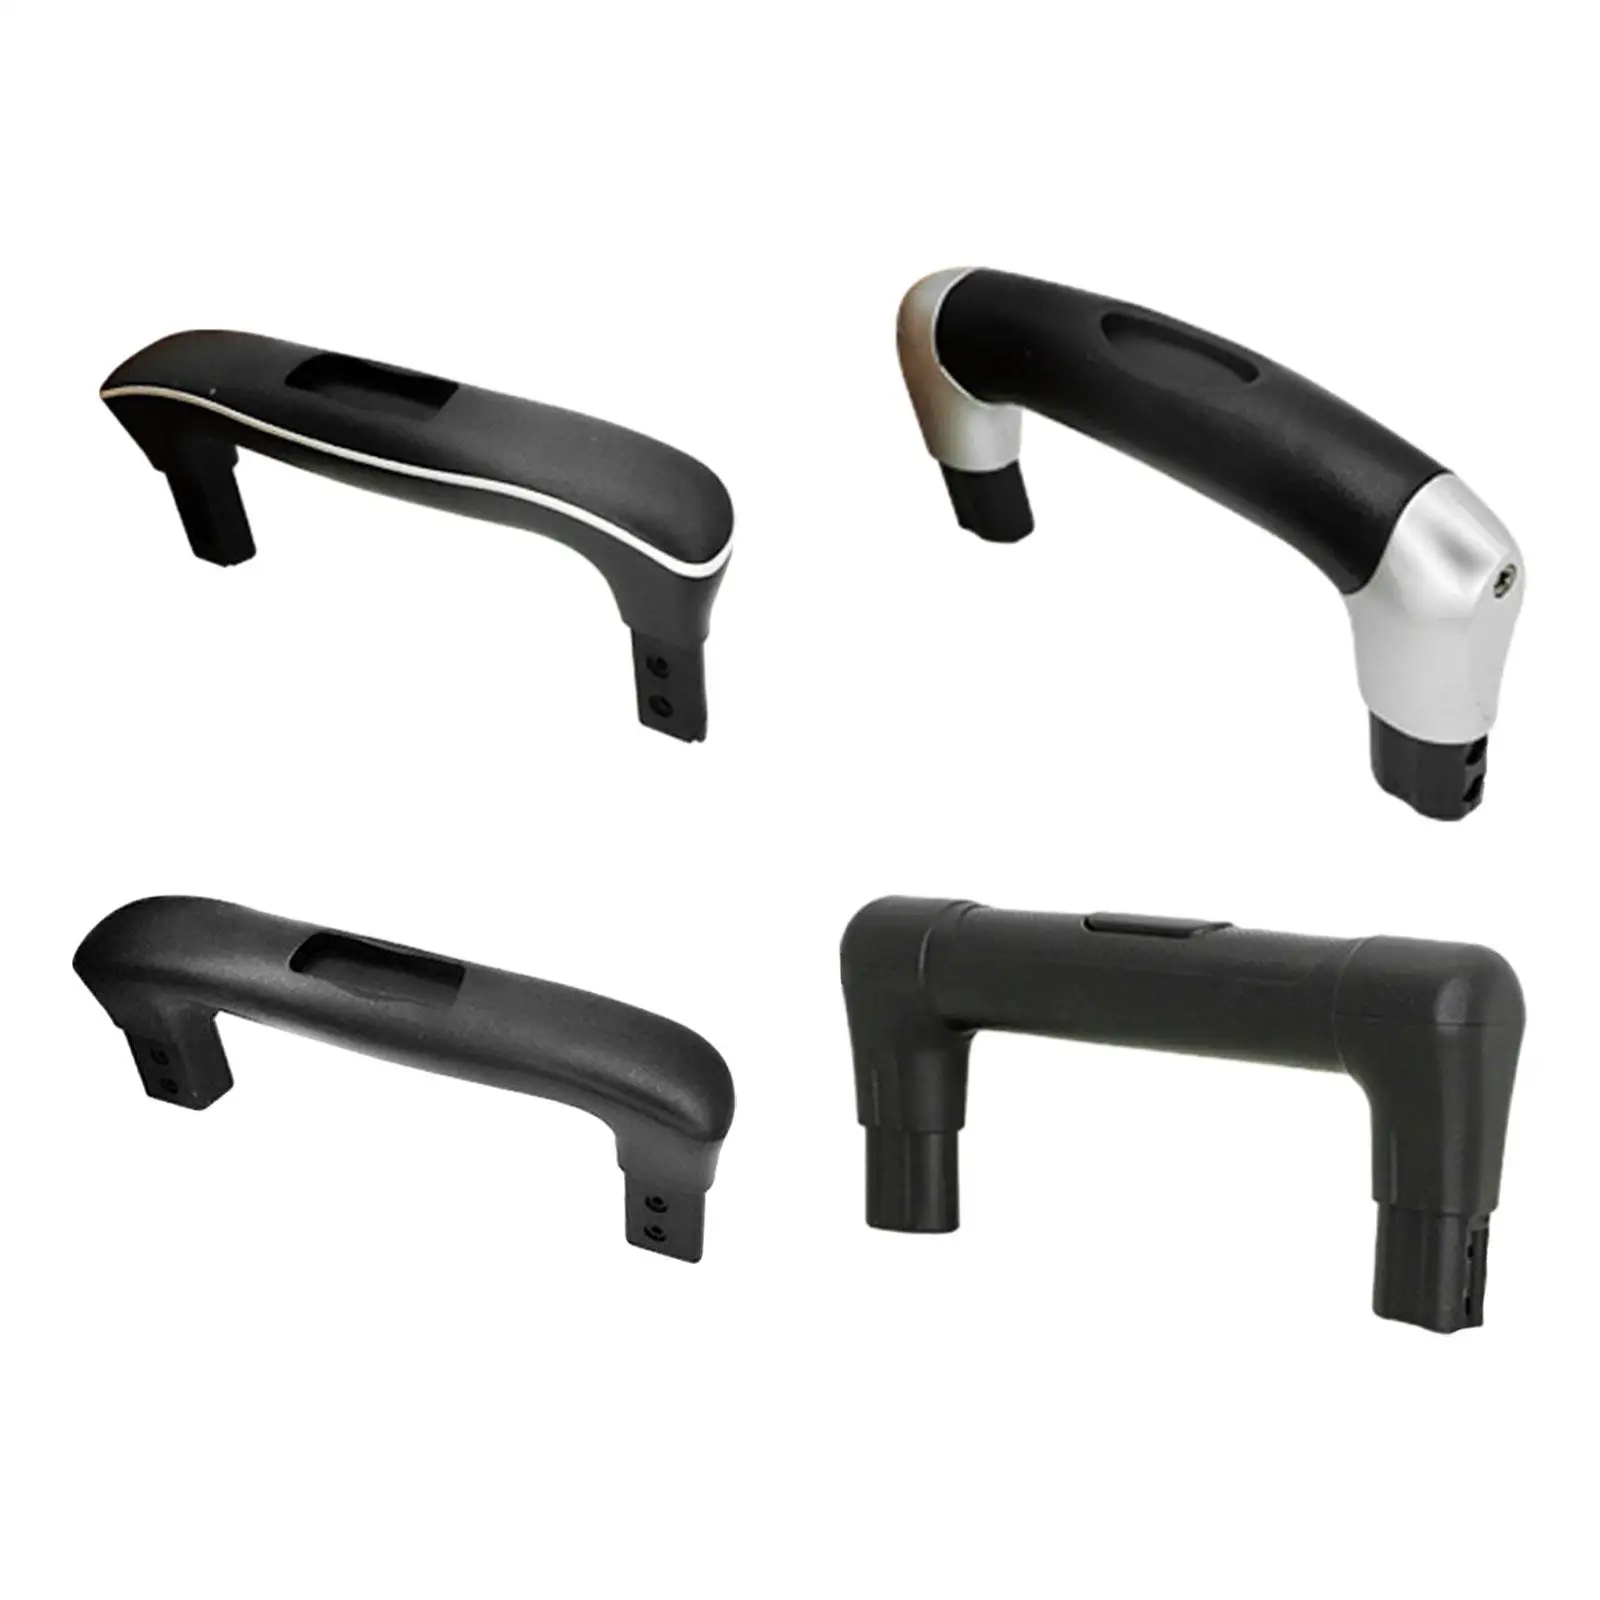 

Luggage Replacement Handle Pulls Wear Resistant Strong Bearing Capacity Comfortable Easy to Install Suitcase Pull Handle Grip